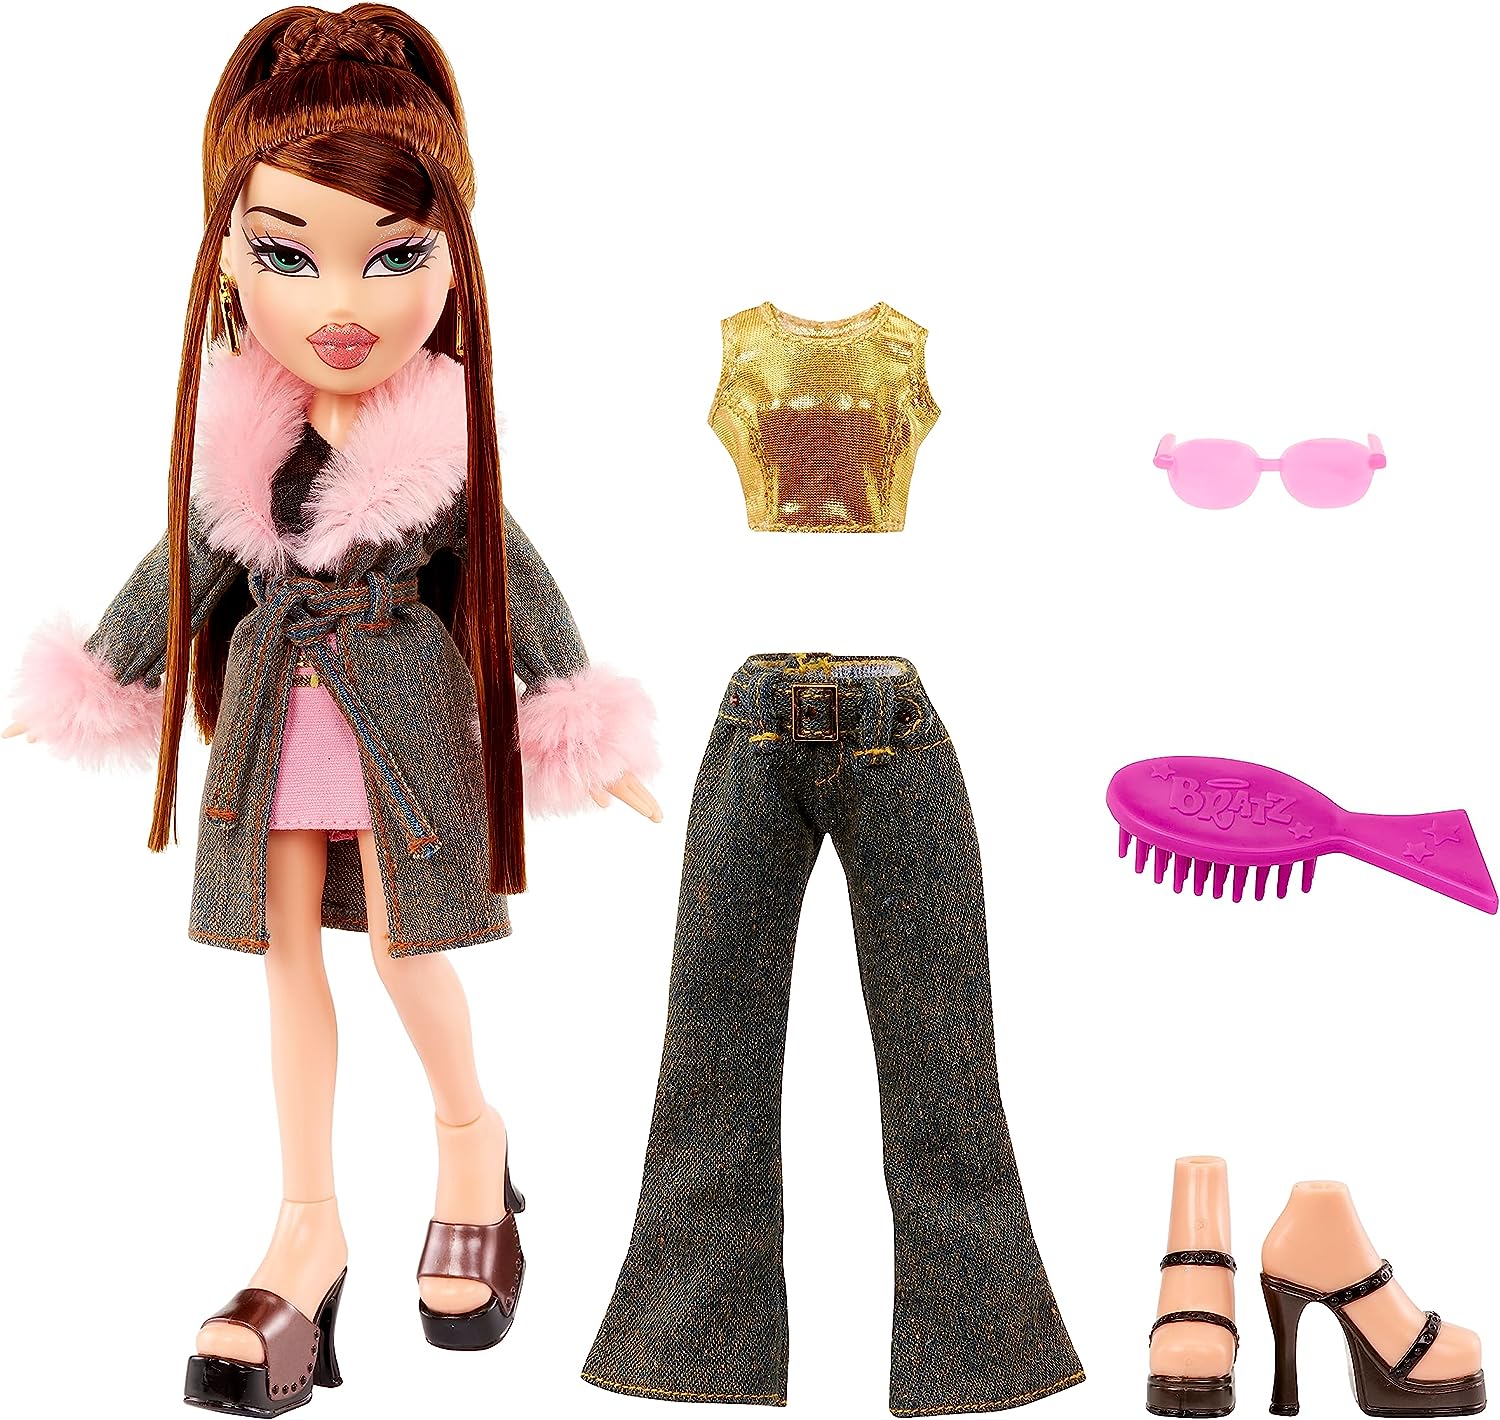 Bratz Original Fashion Doll Dana Series 3 with 2 Outfits and Poster, Collectors Ages 6 7 8 9 10+ - image 3 of 7